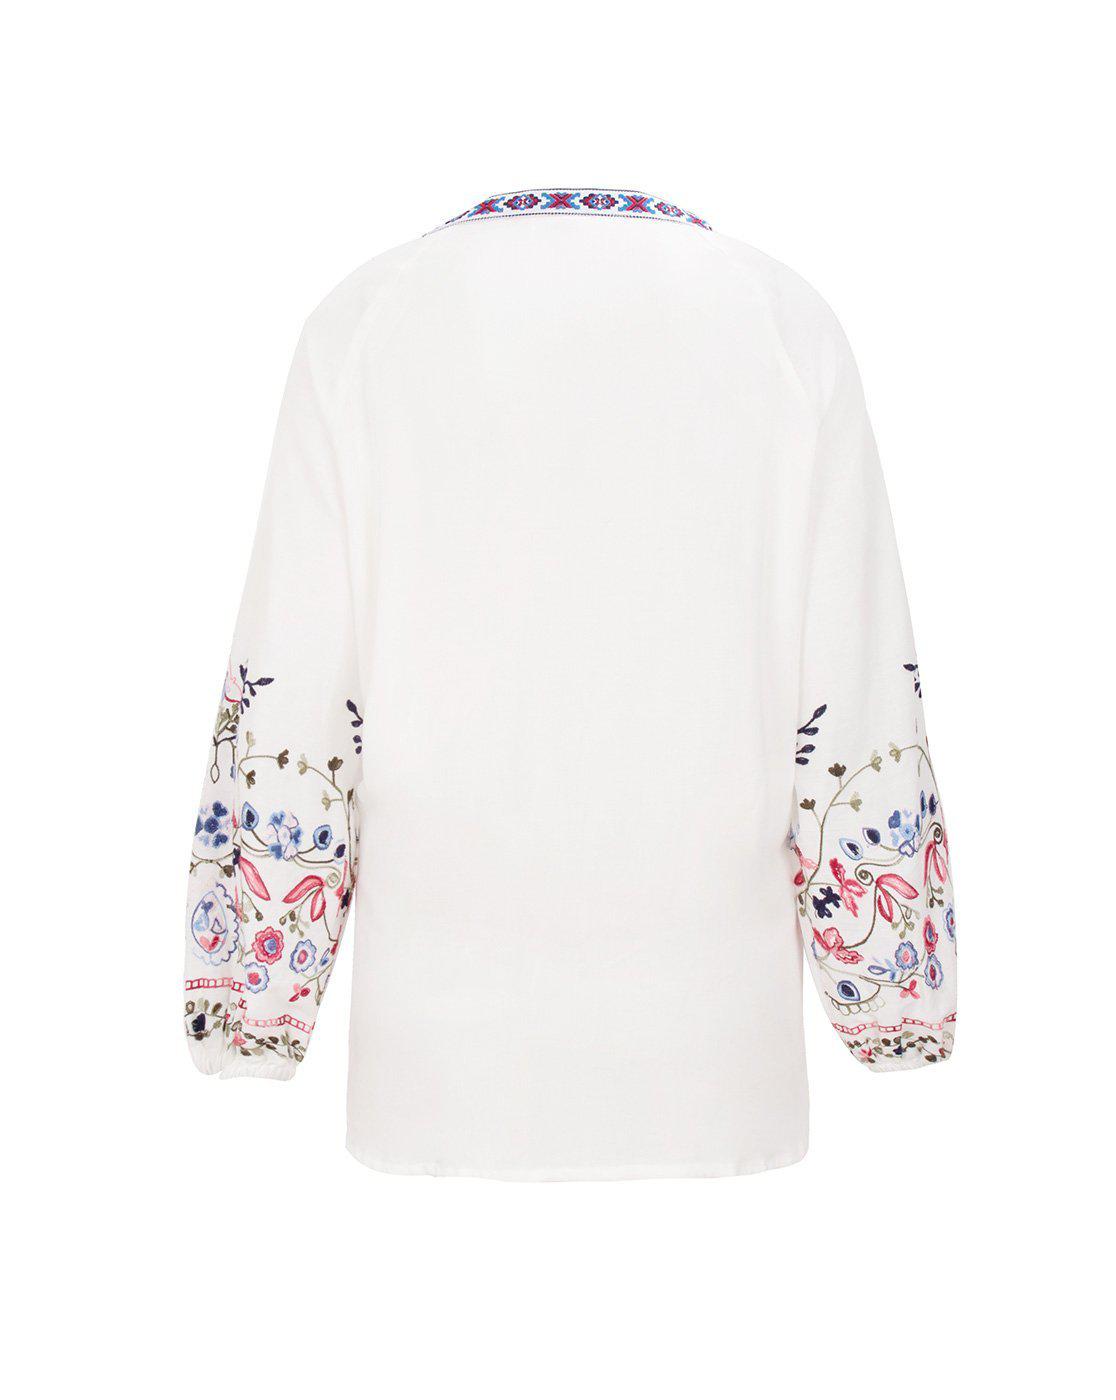 Vintage Embroidery Floral Long Sleeve Blouse-ChicBohoStyle